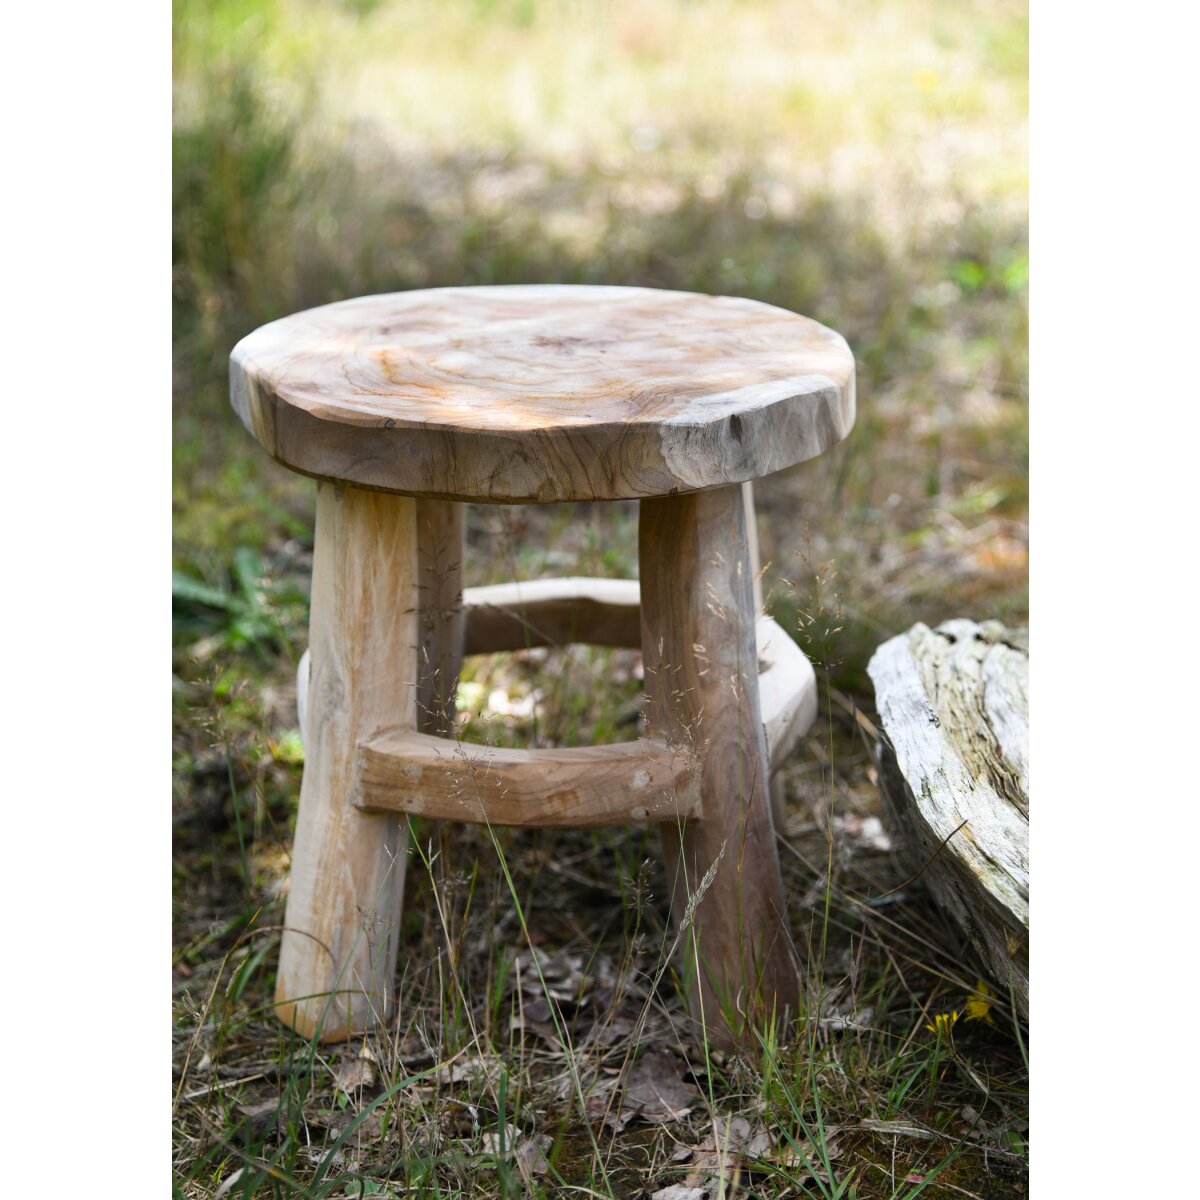 Small wooden stool, approx. 31 cm high